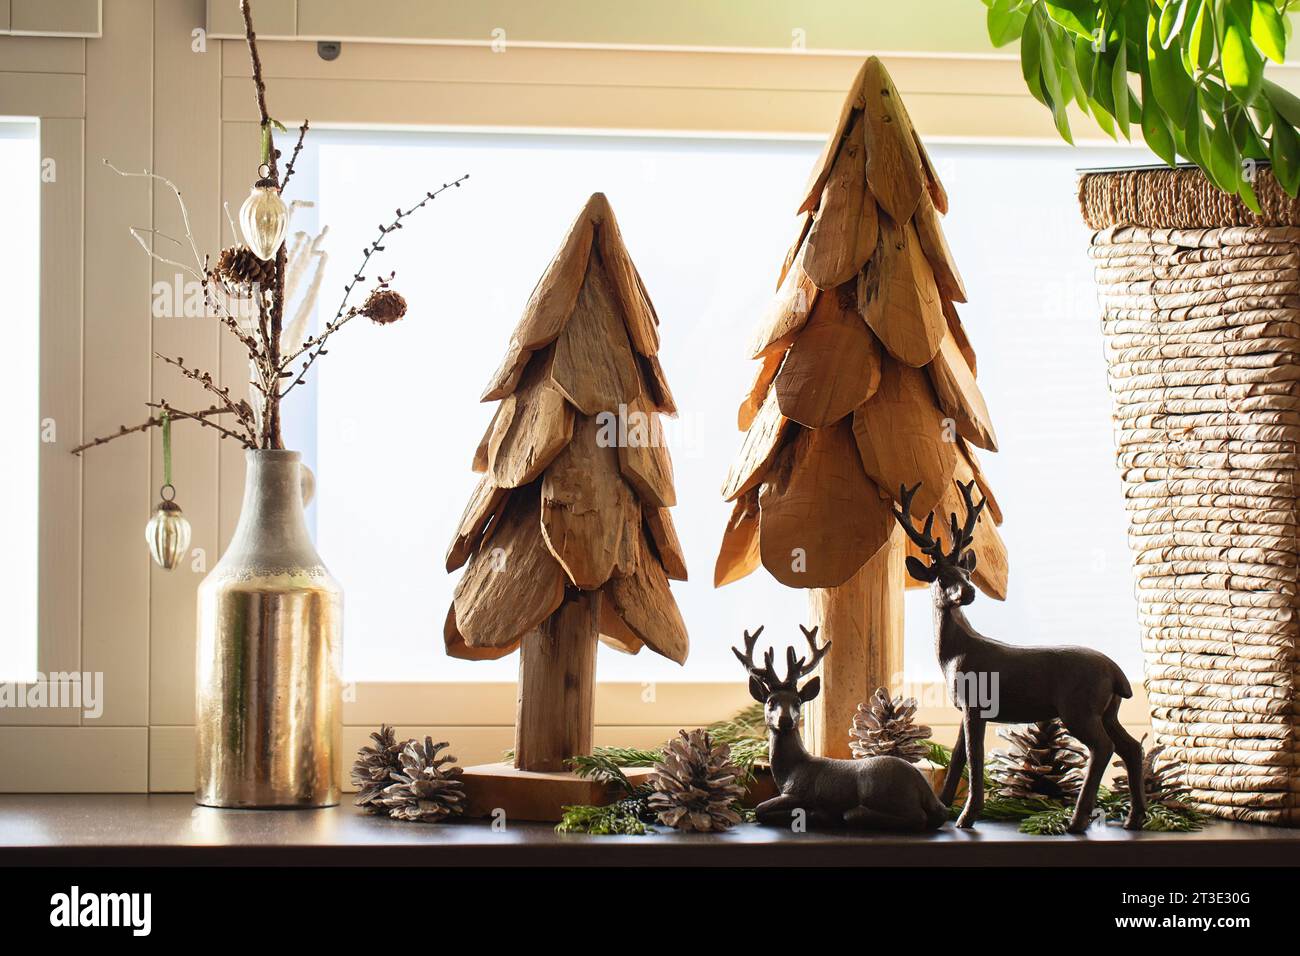 Christmas home decoration. Artificial wooden Christmas trees, fir cones and deer figurines on the window in the interior. Merry Christmas Stock Photo